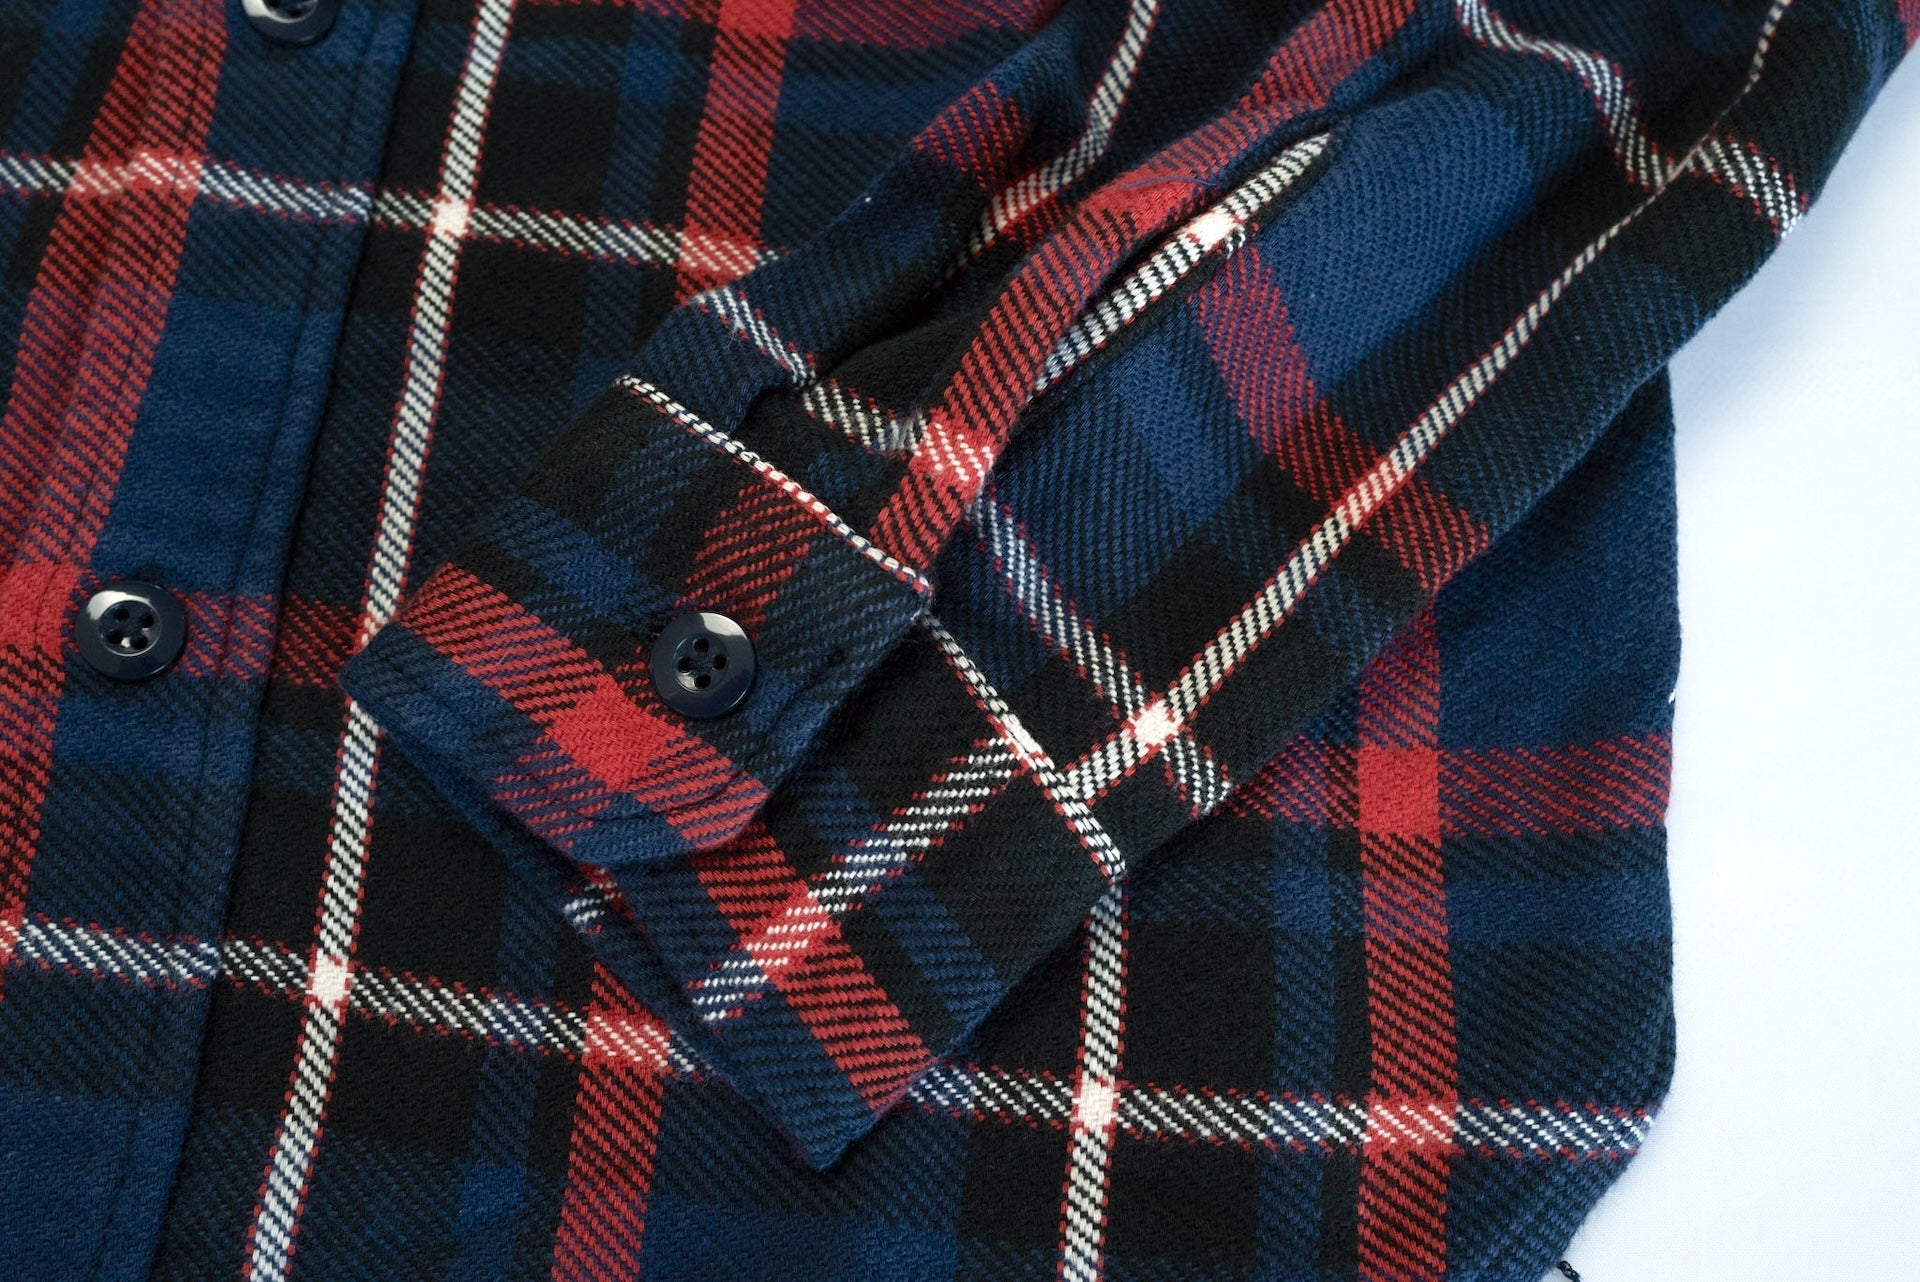 Pure Blue Japan 11oz Raised Flannel Early Workshirt (Navy X Red)